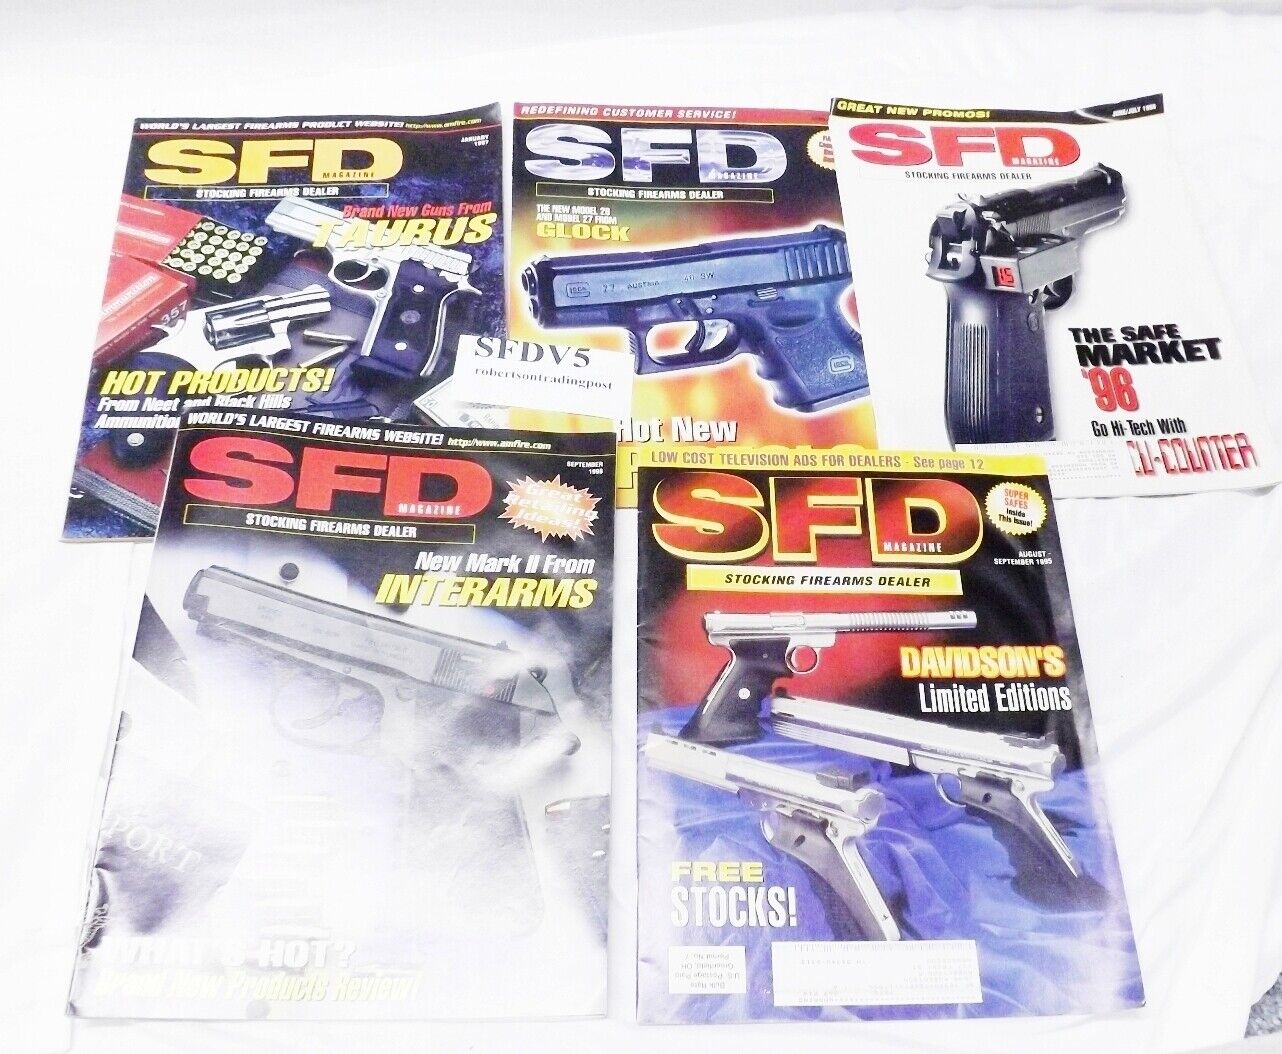 5 Different Stocking Firearms Dealer Magazines 1996 – 1997 $4 each & Free Ship